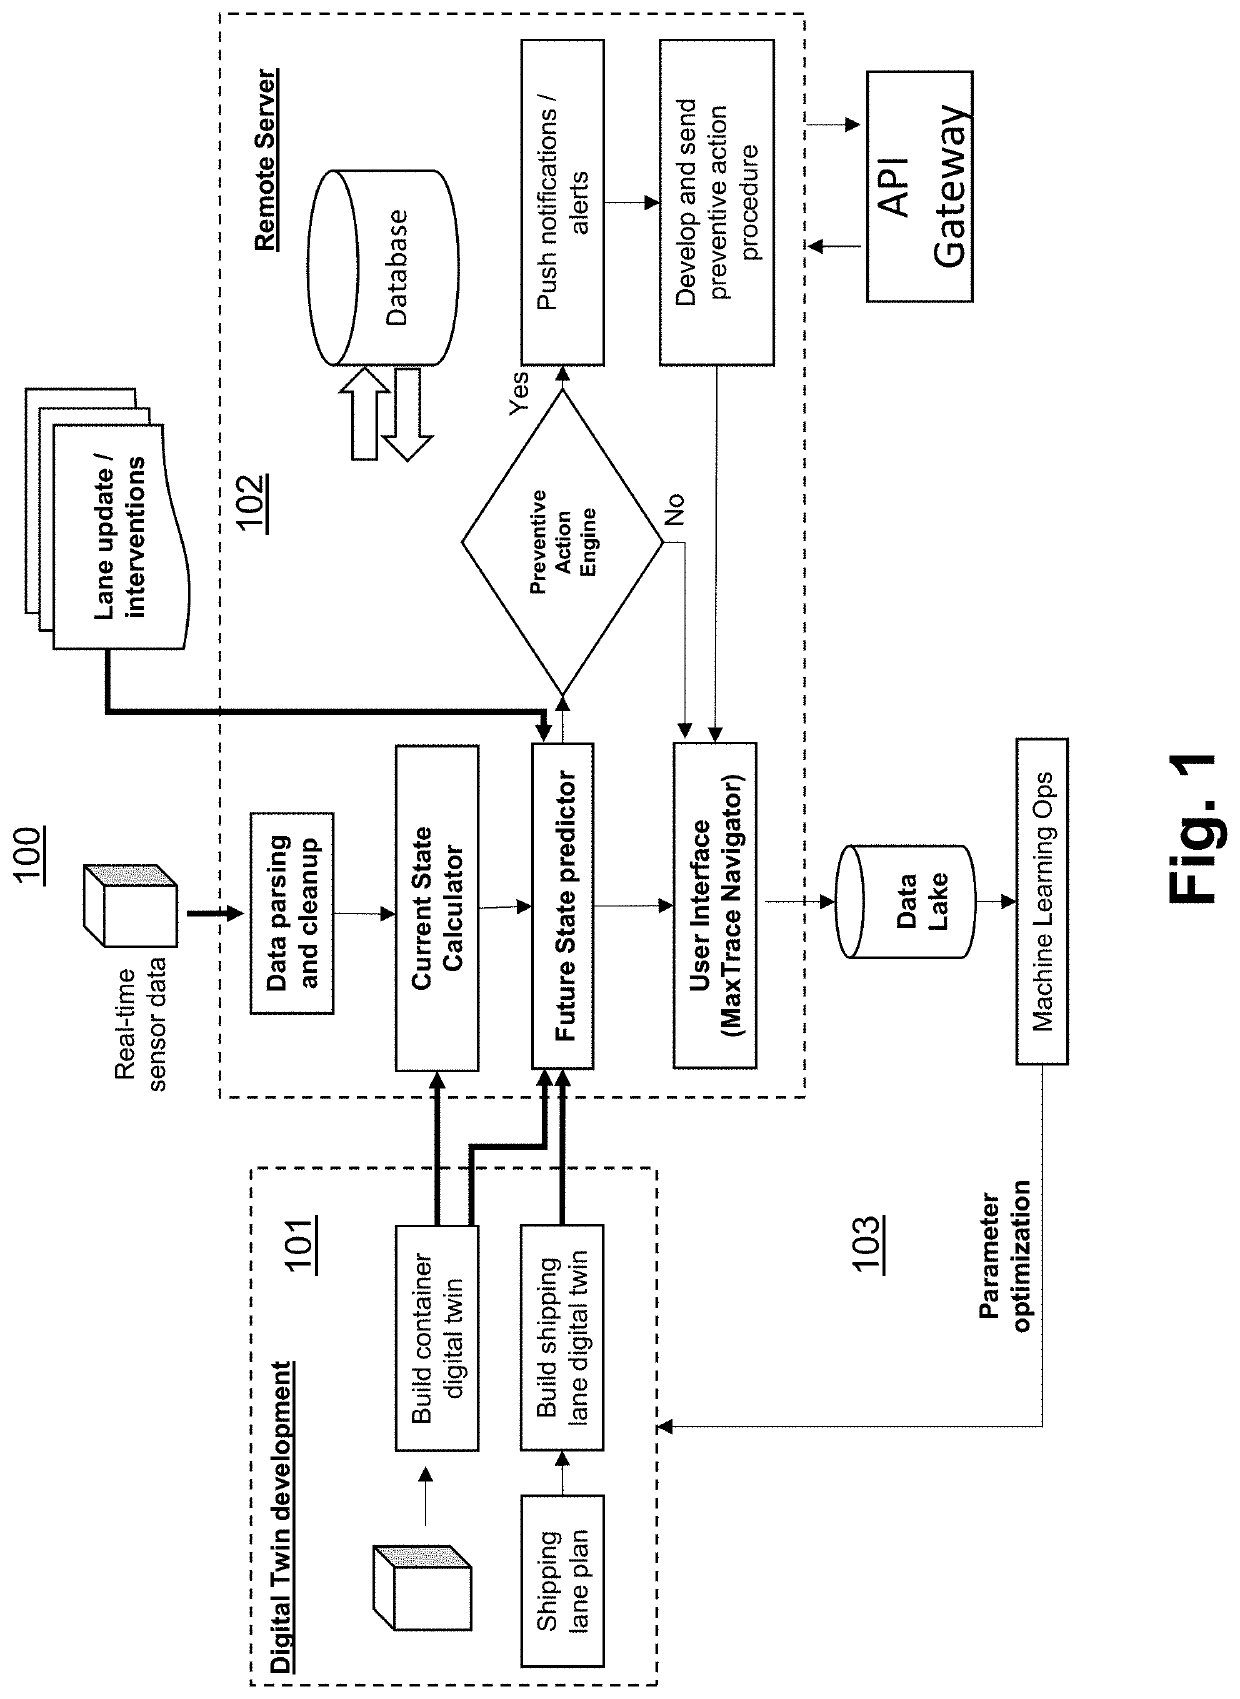 Automated System for Payload Condition Monitoring and Prediction Using Digital Twins